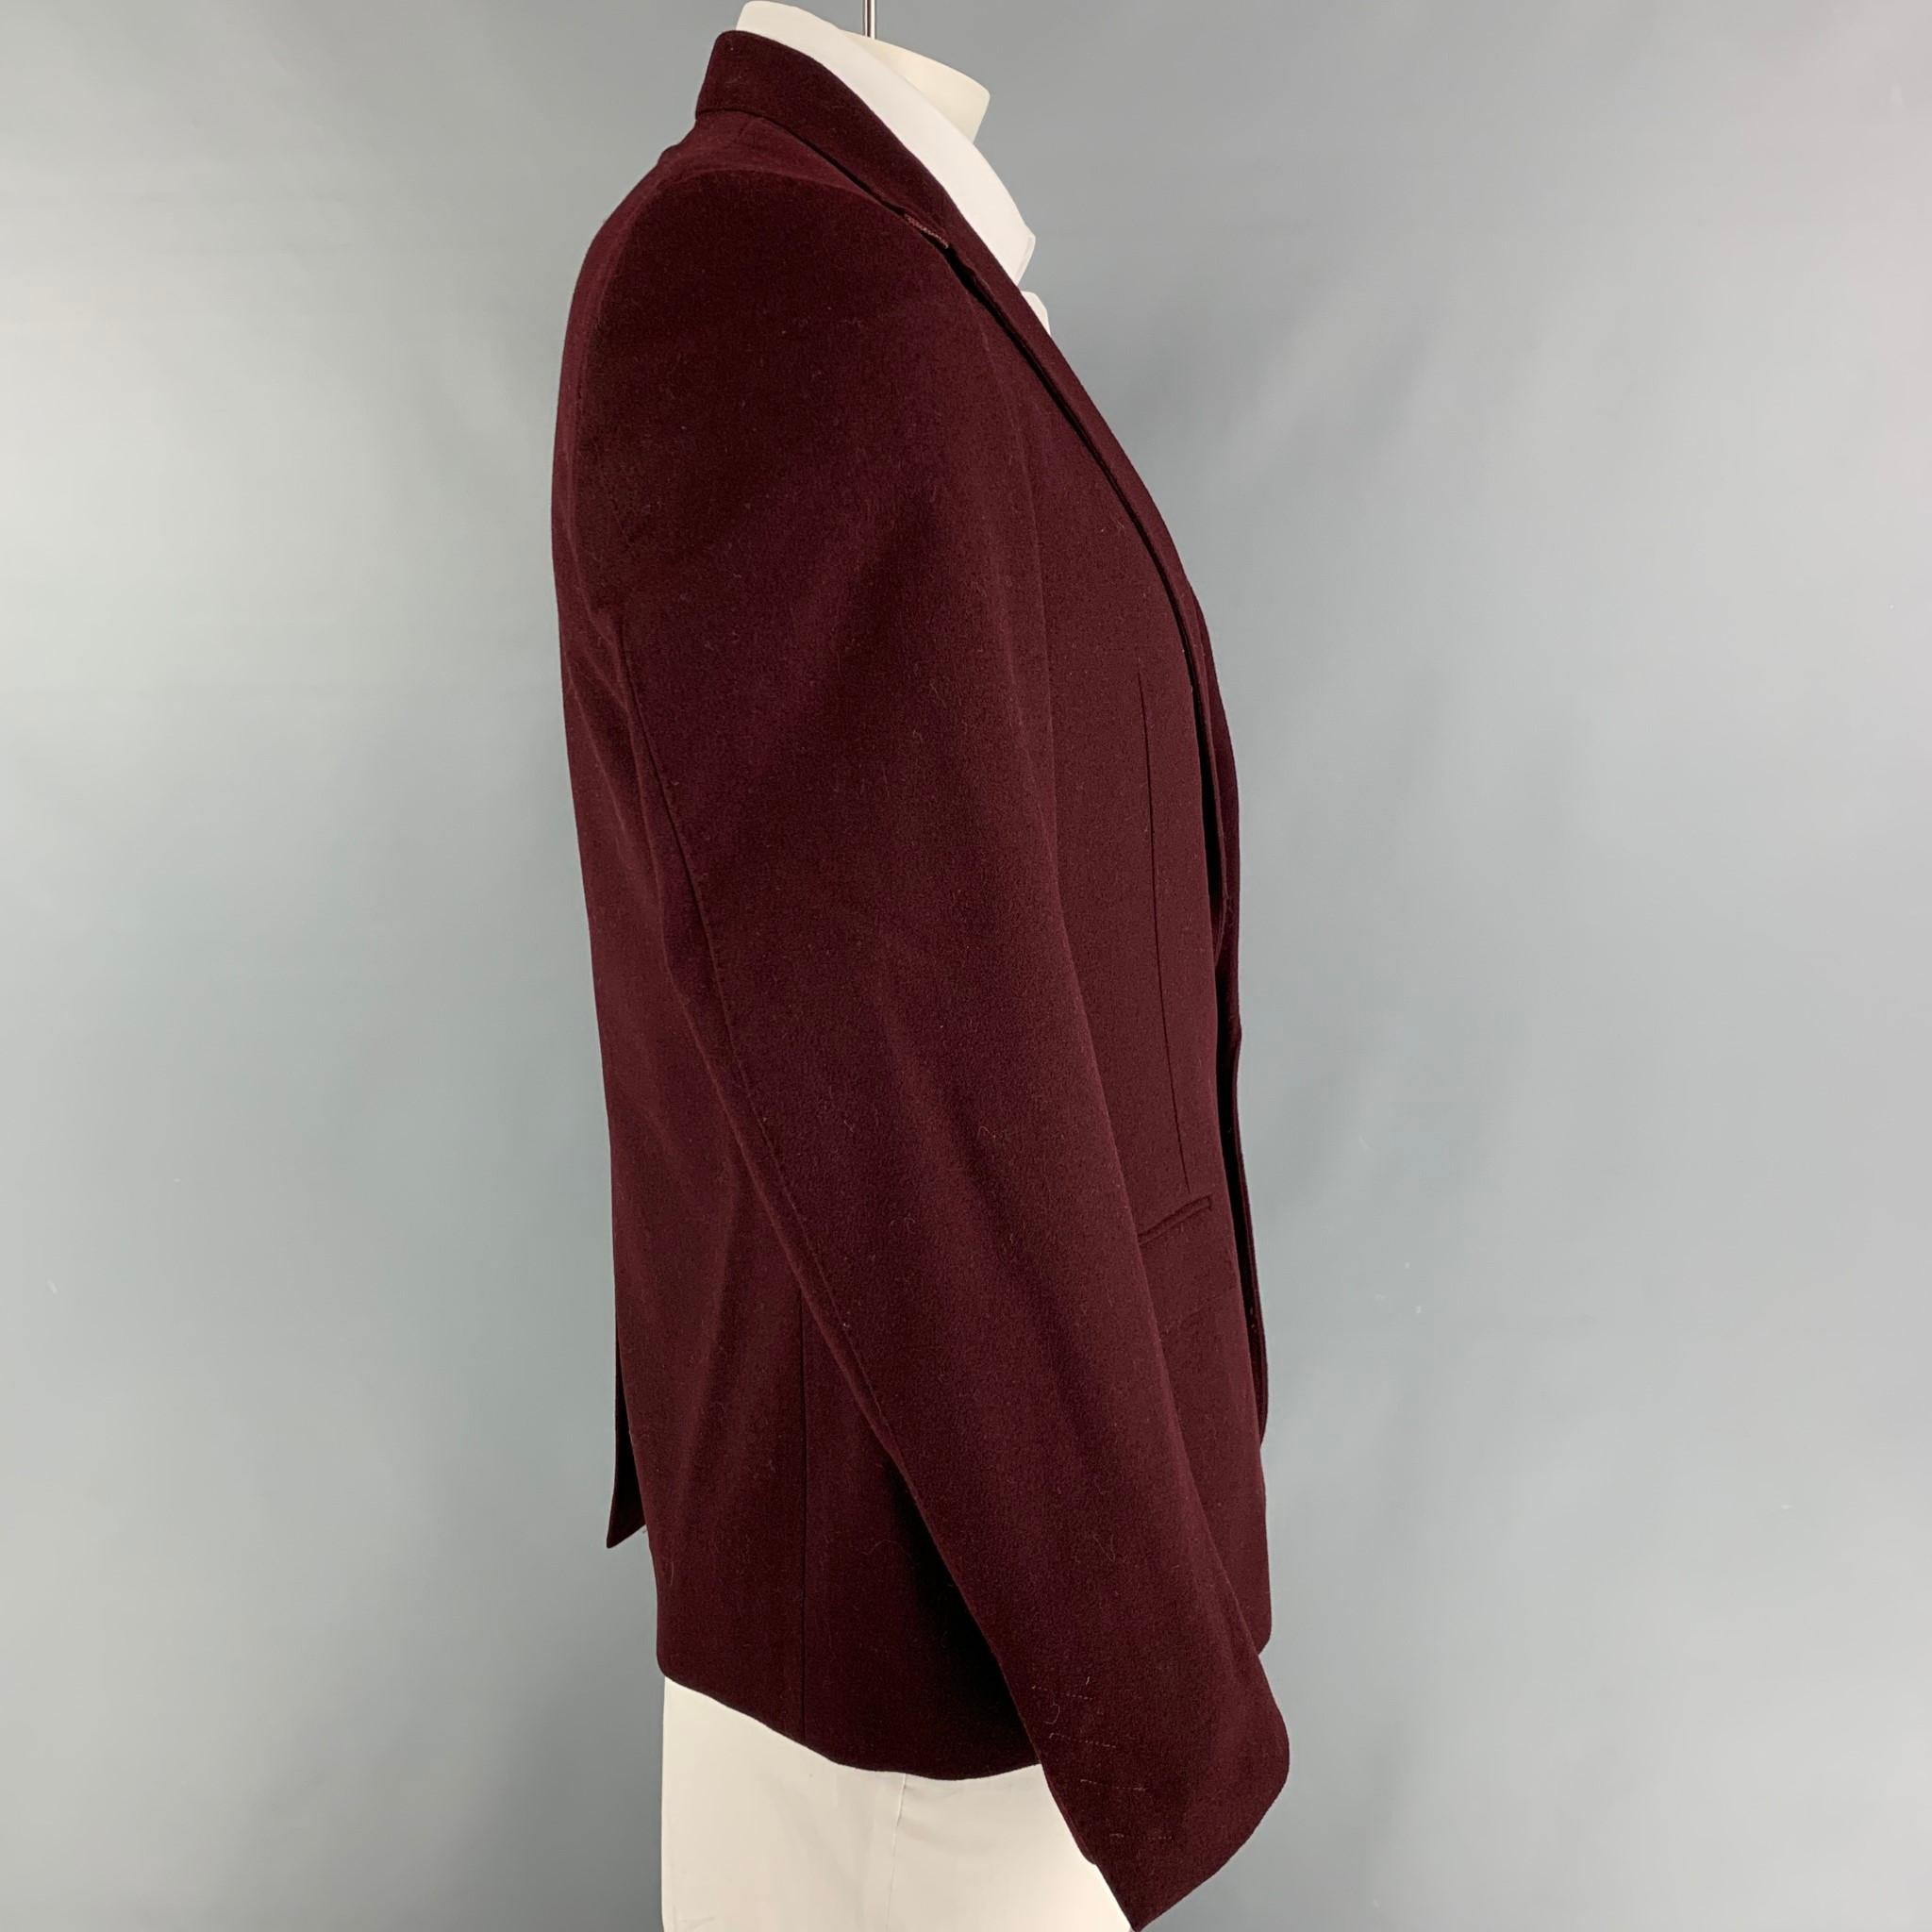 CoSTUME NATIONAL sport coat comes in a burgundy wool with a full liner featuring a notch lapel, flap pockets, single back vent, and  single button closure. Made in Italy. 

Very Good Pre-Owned Condition.
Marked: 52

Measurements:

Shoulder: 18.5